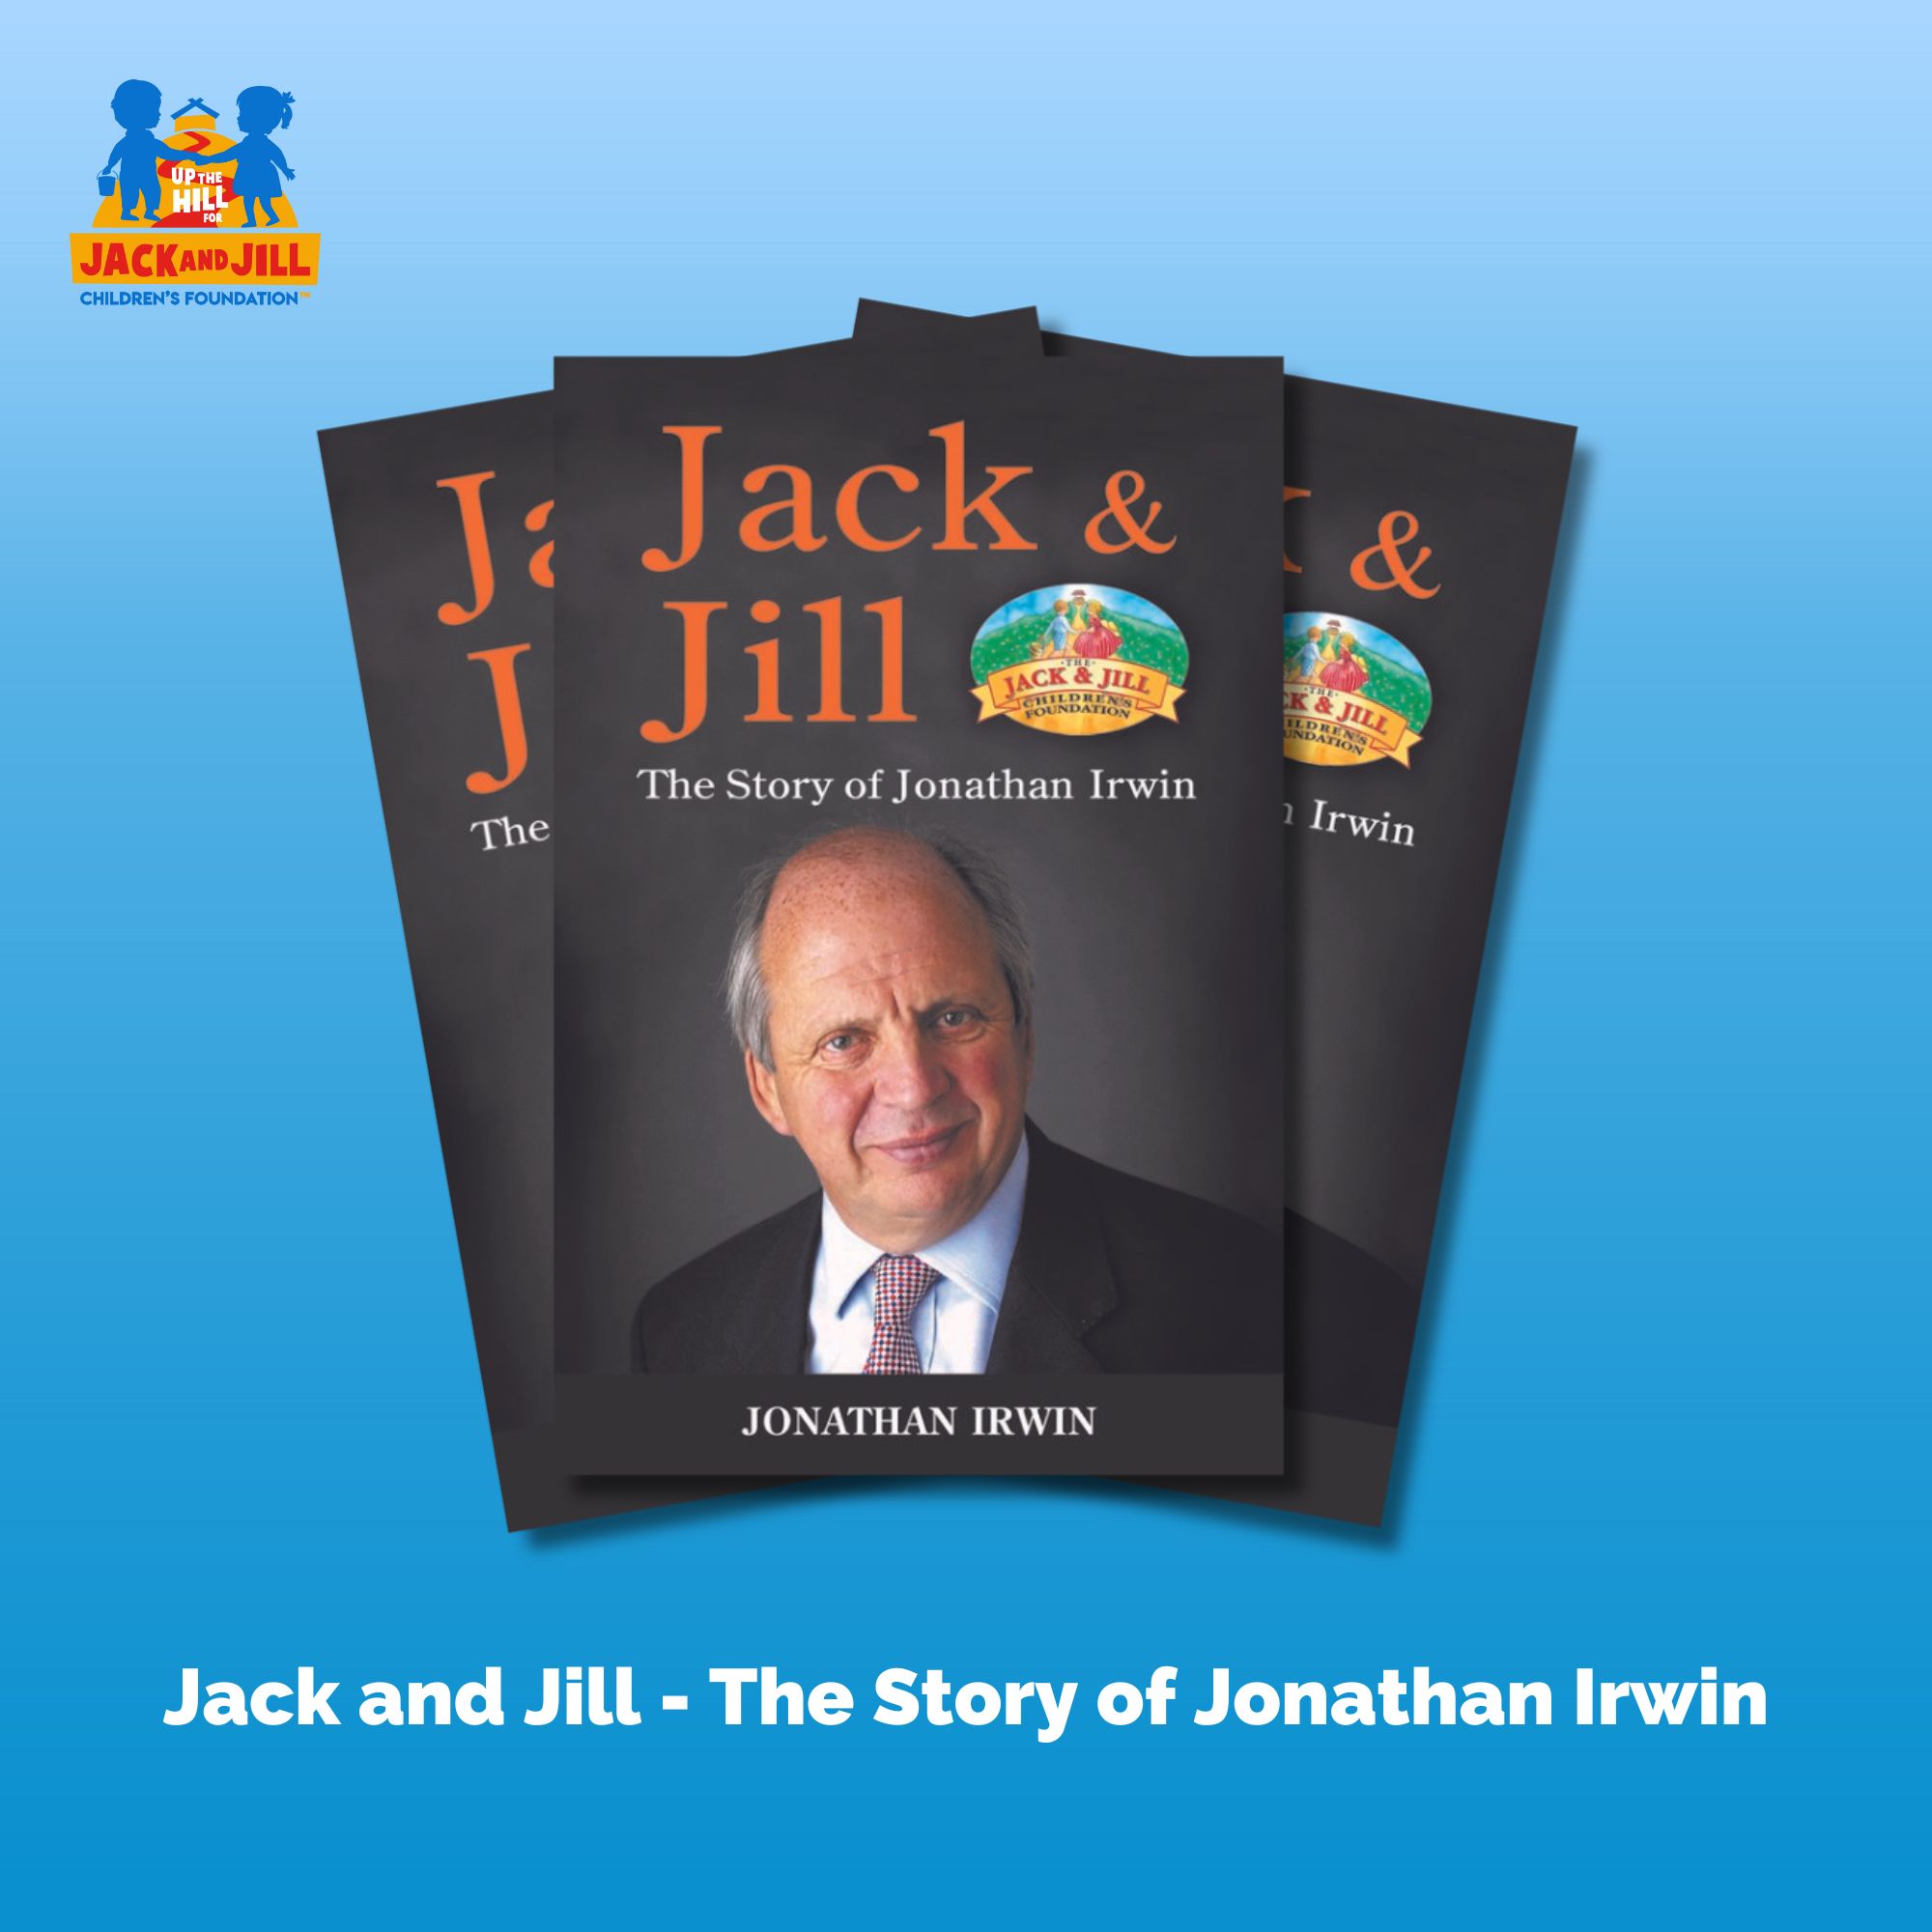 Jack and Jill - The Story of Jonathan Irwin book cover graphic